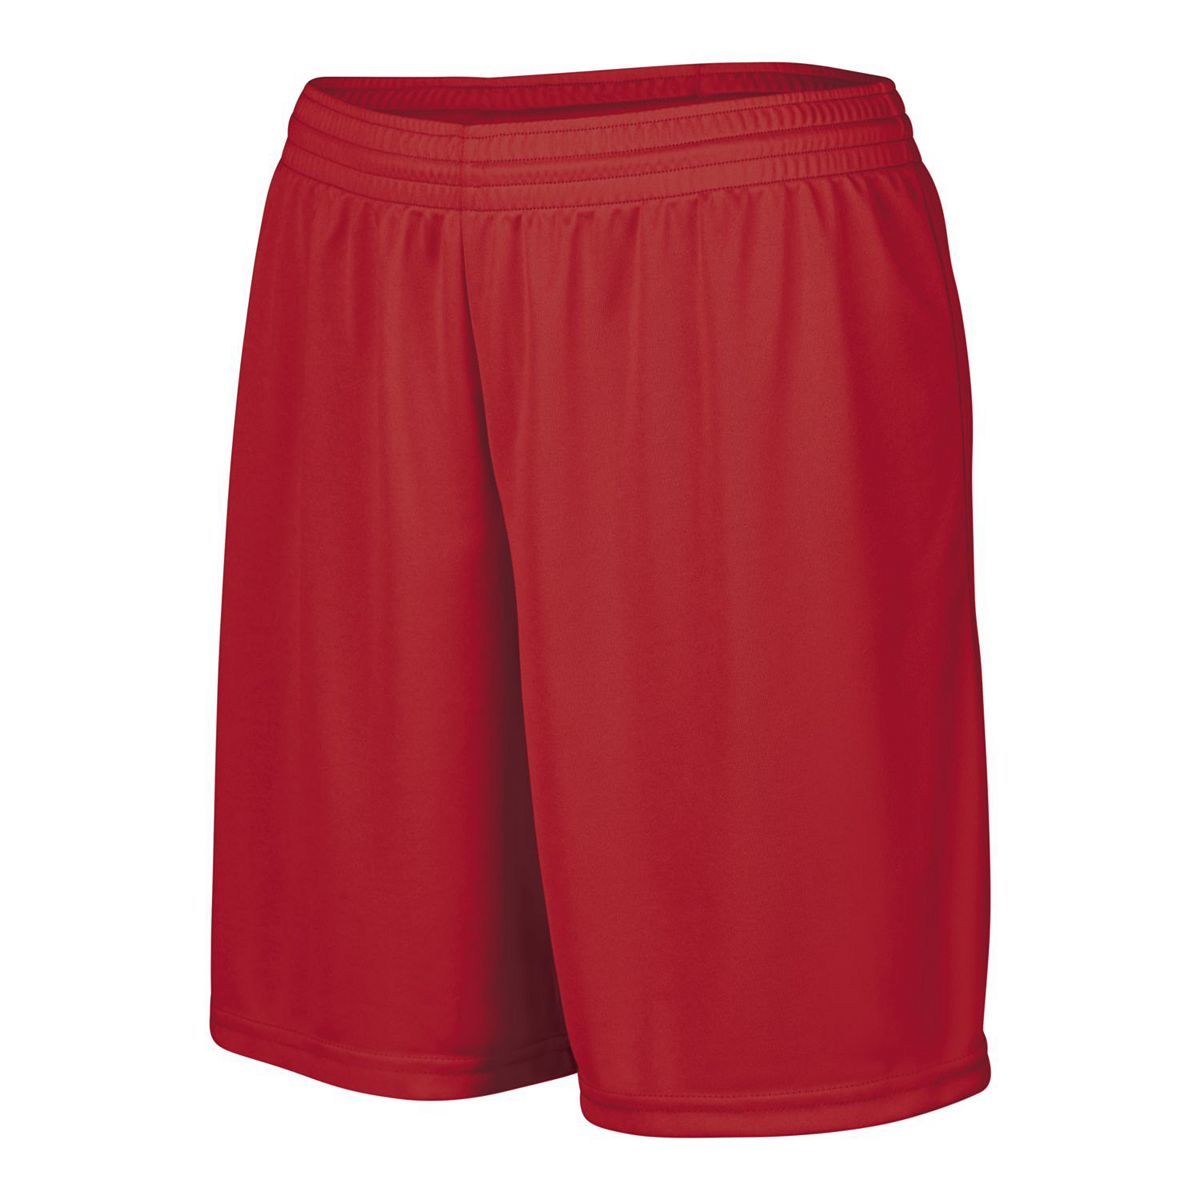 Augusta Sportswear Girls Octane Shorts in Red  -Part of the Girls, Augusta-Products, Girls-Shorts product lines at KanaleyCreations.com